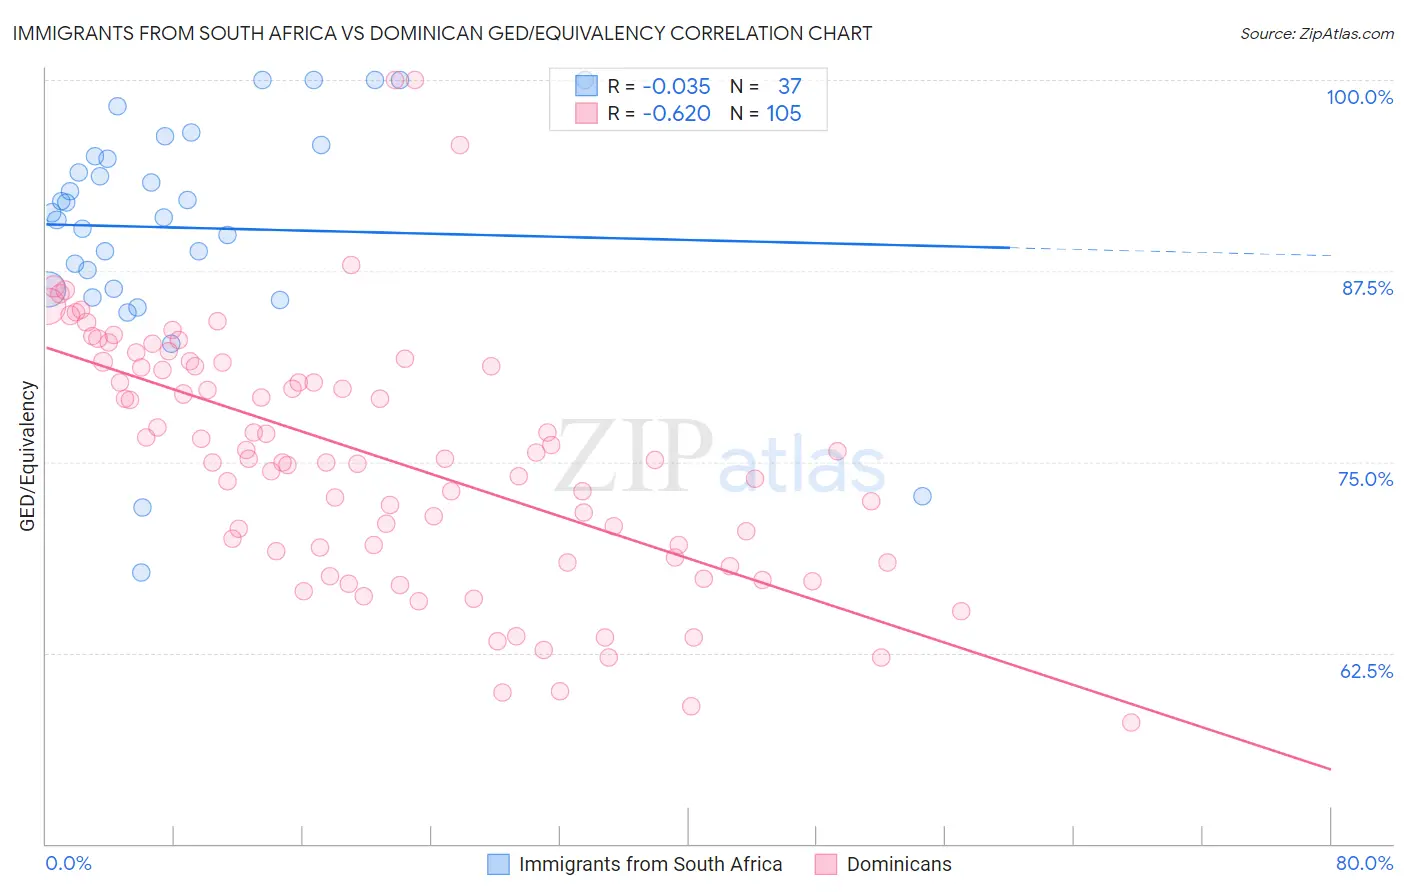 Immigrants from South Africa vs Dominican GED/Equivalency